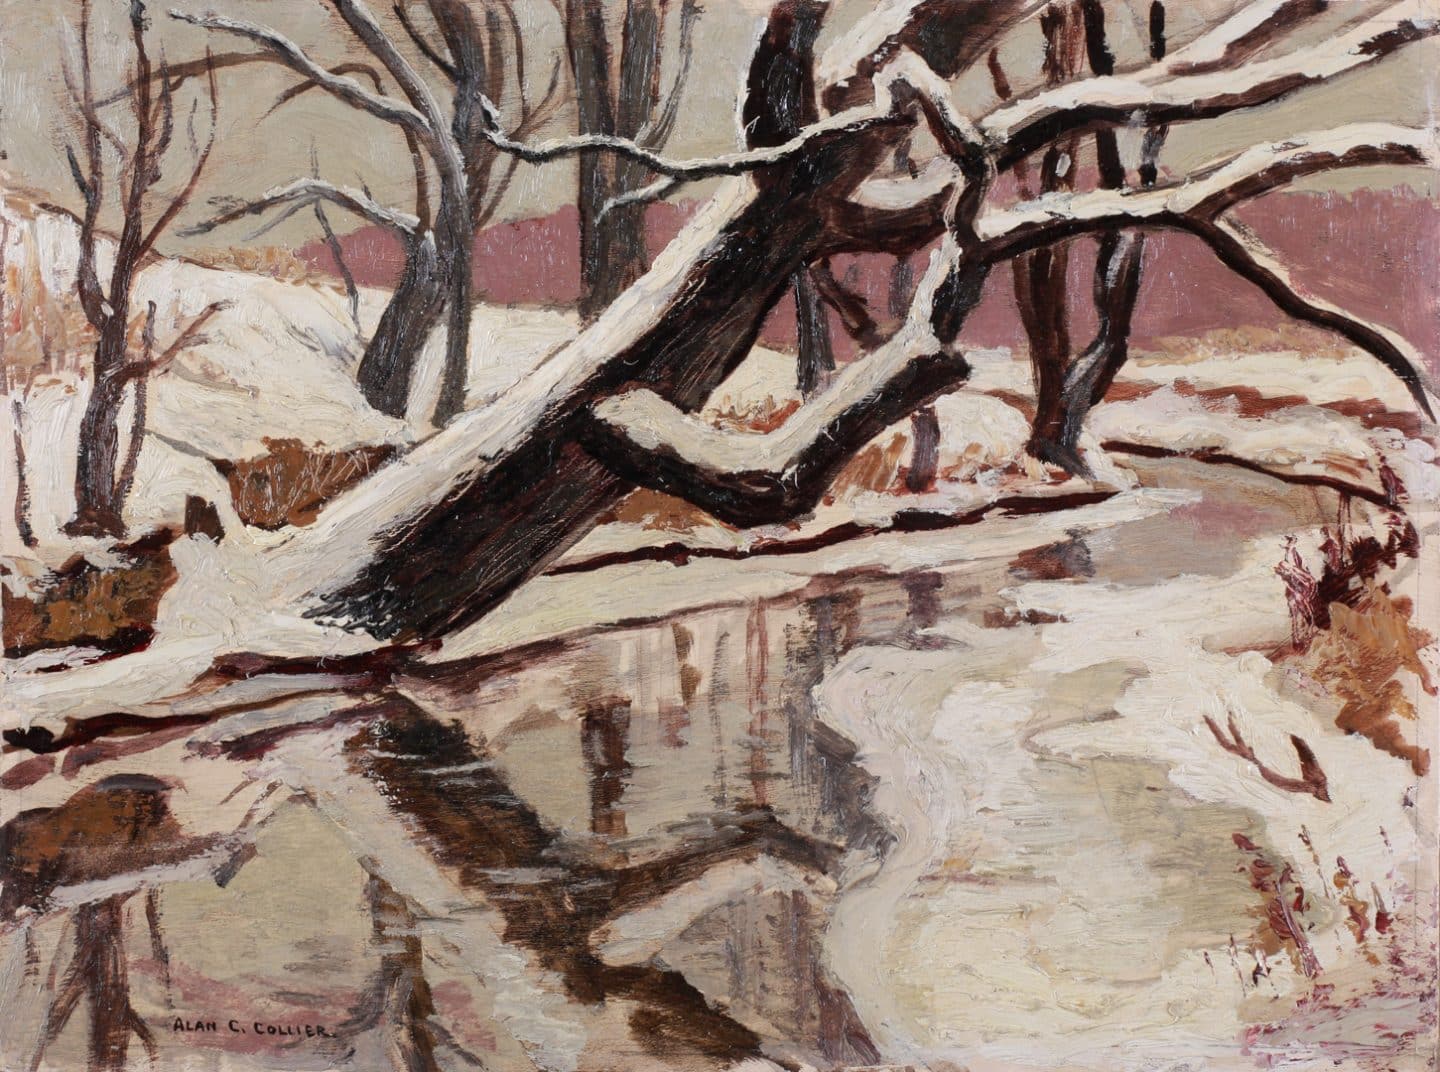 Alan Caswell Collier, Winter Stream, near Bolton, Ontario, 1947, oil on board. The Ian M Collier Collection, Gift of Ian Collier, 2016 (59-017.02)